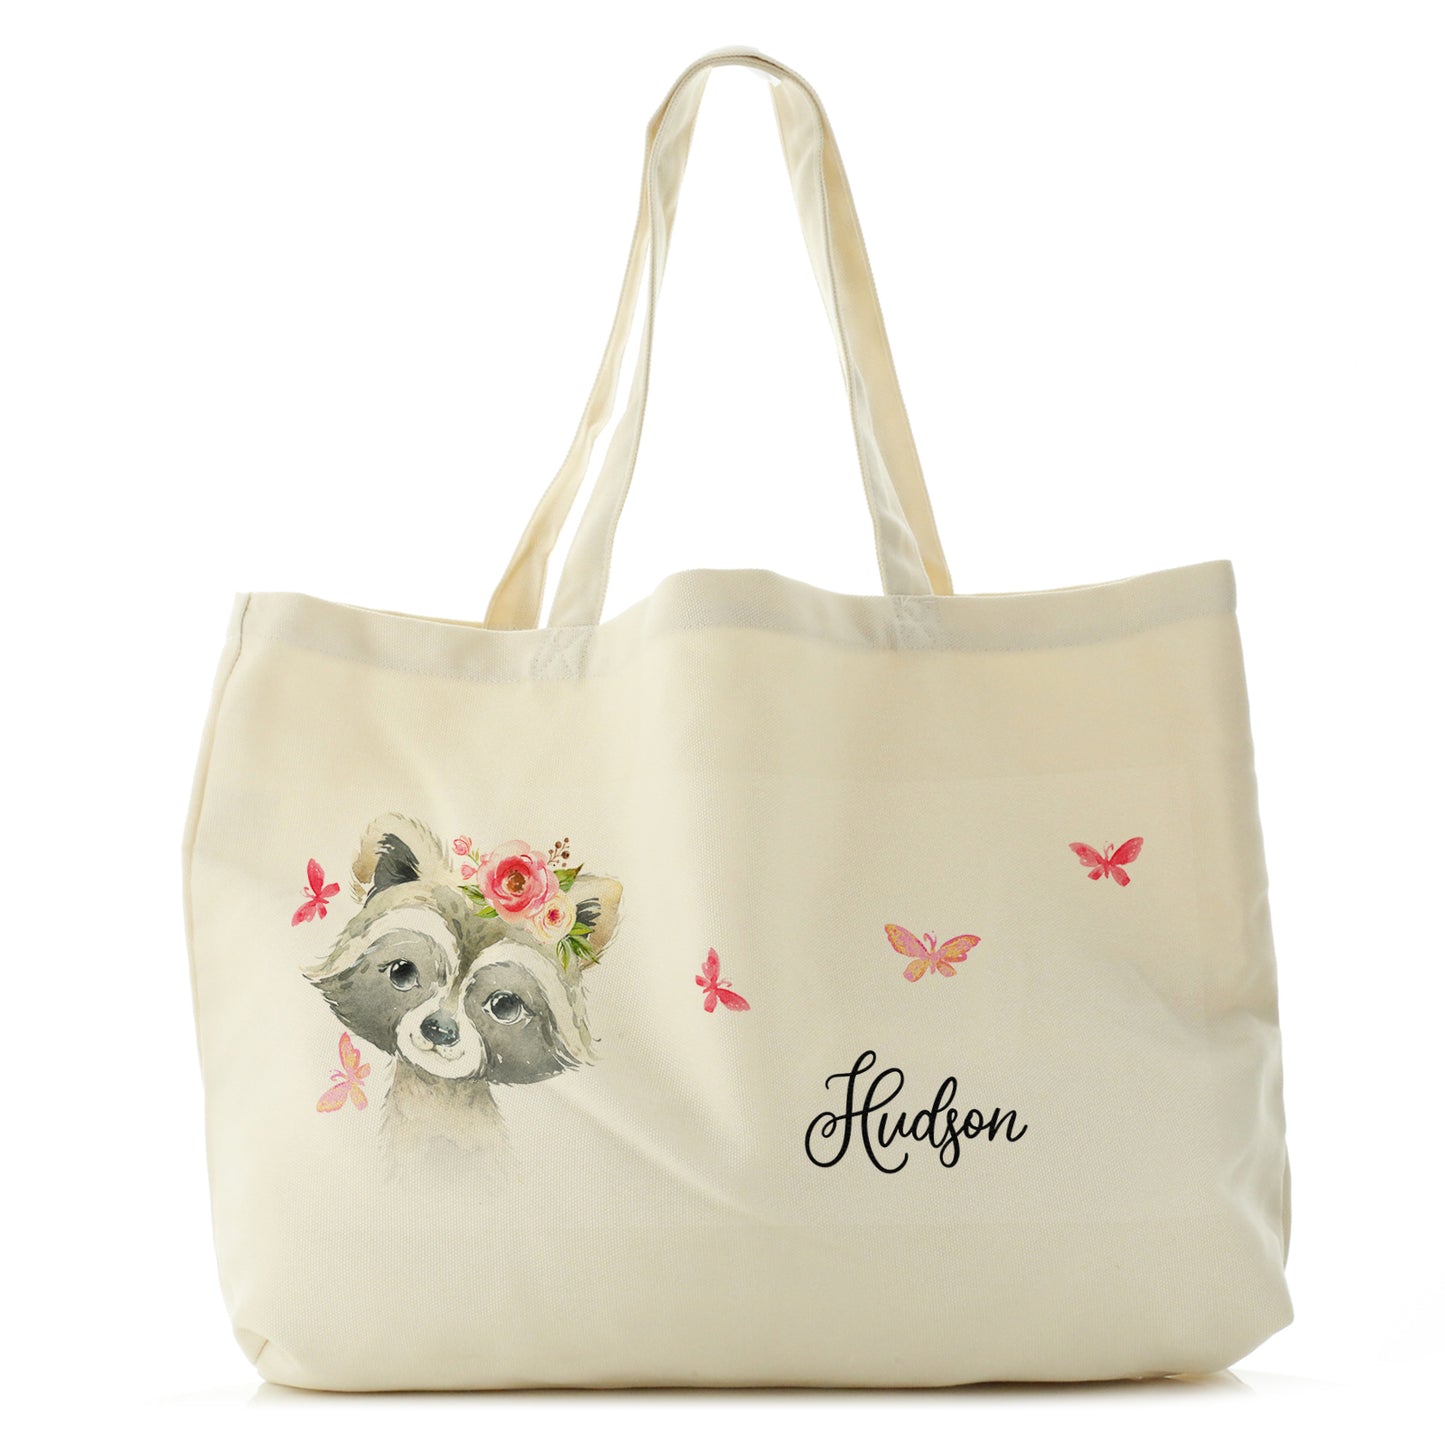 Personalised Canvas Tote Bag with Raccoon Pink Butterfly Flowers and Cute Text